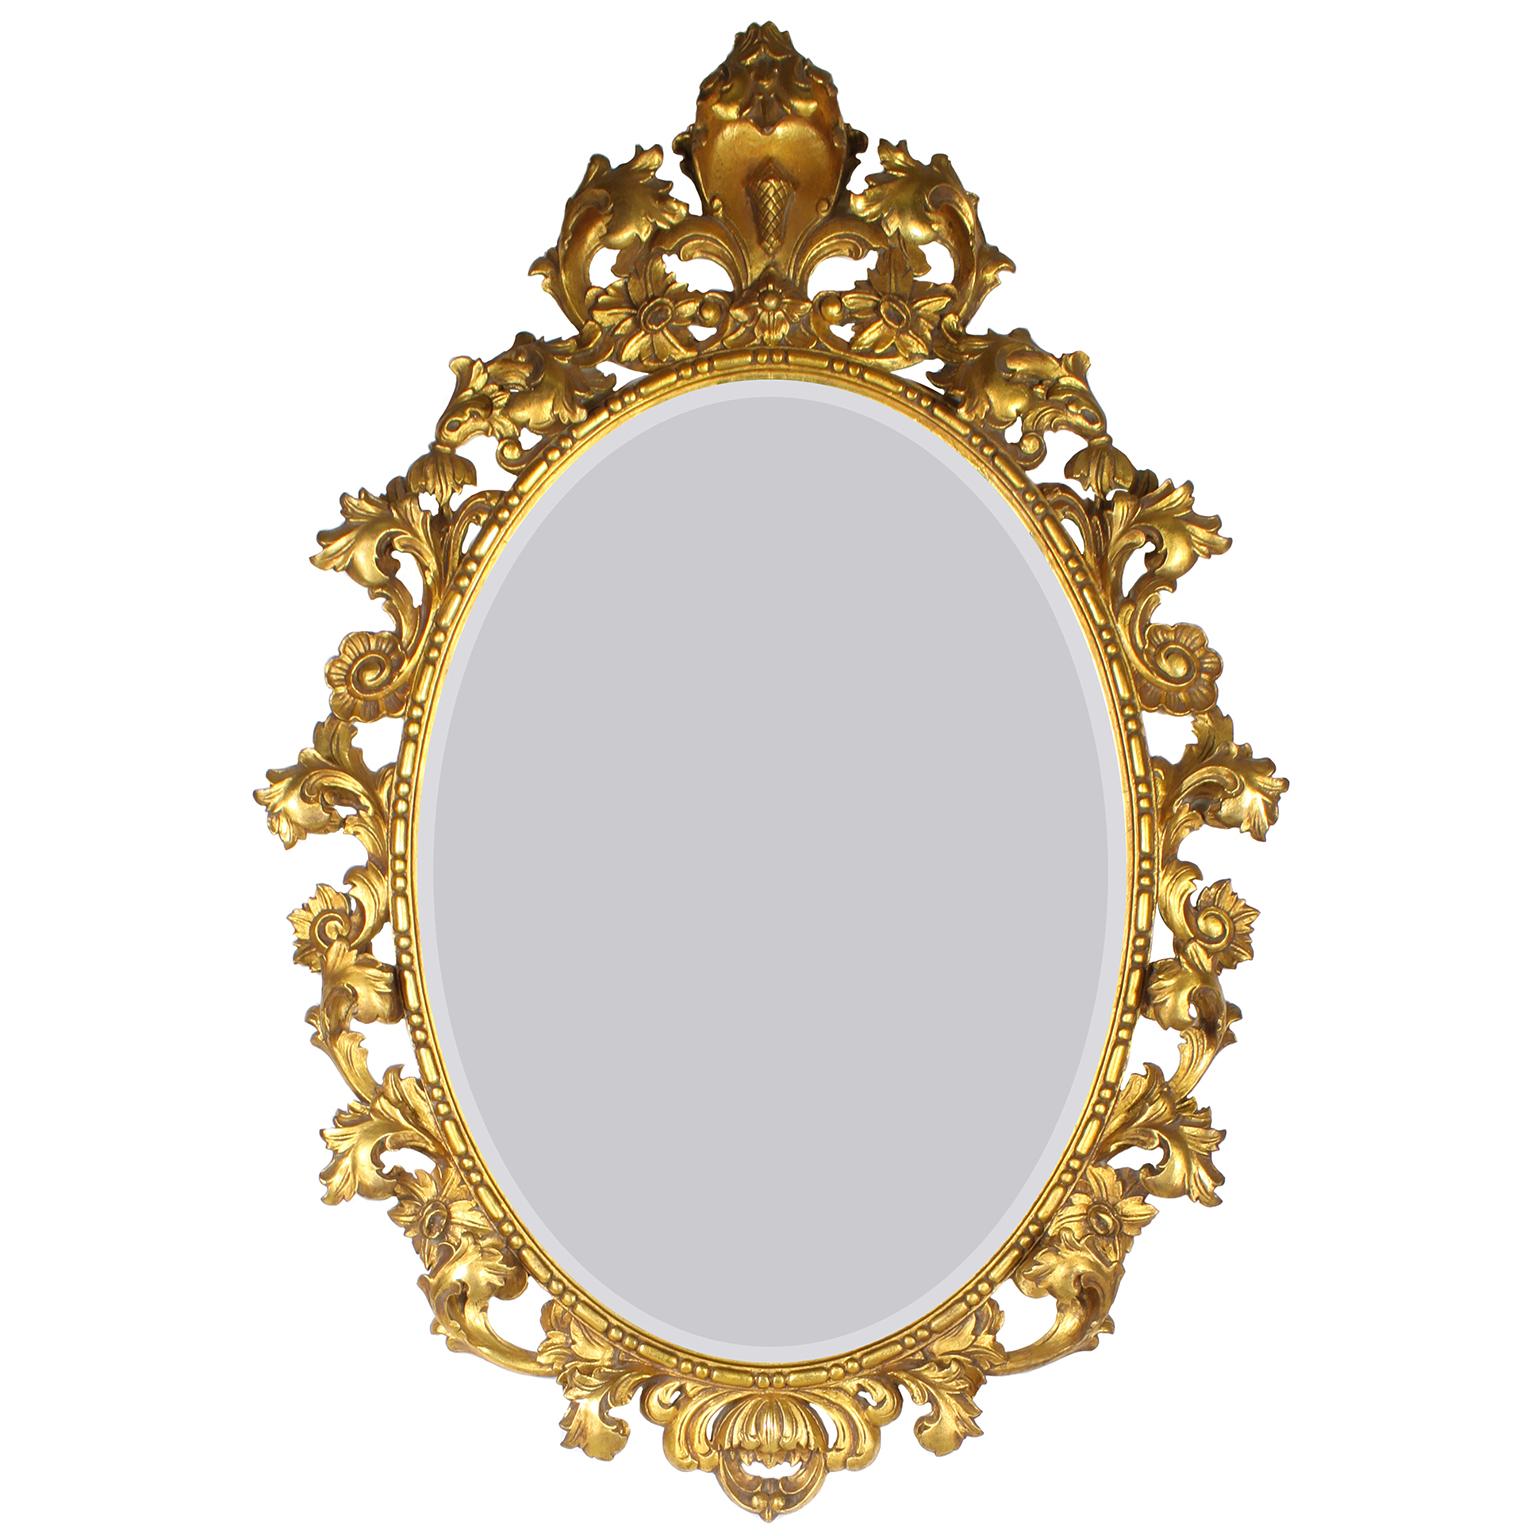 An Italian Florentine gilt wood carved mirror and console with marble top set. The gilt-wood oval mirror frame with a floral and scrolled acanthus design, topped with an acorn shield and fitted with a beveled mirror plate. The wall mounted console